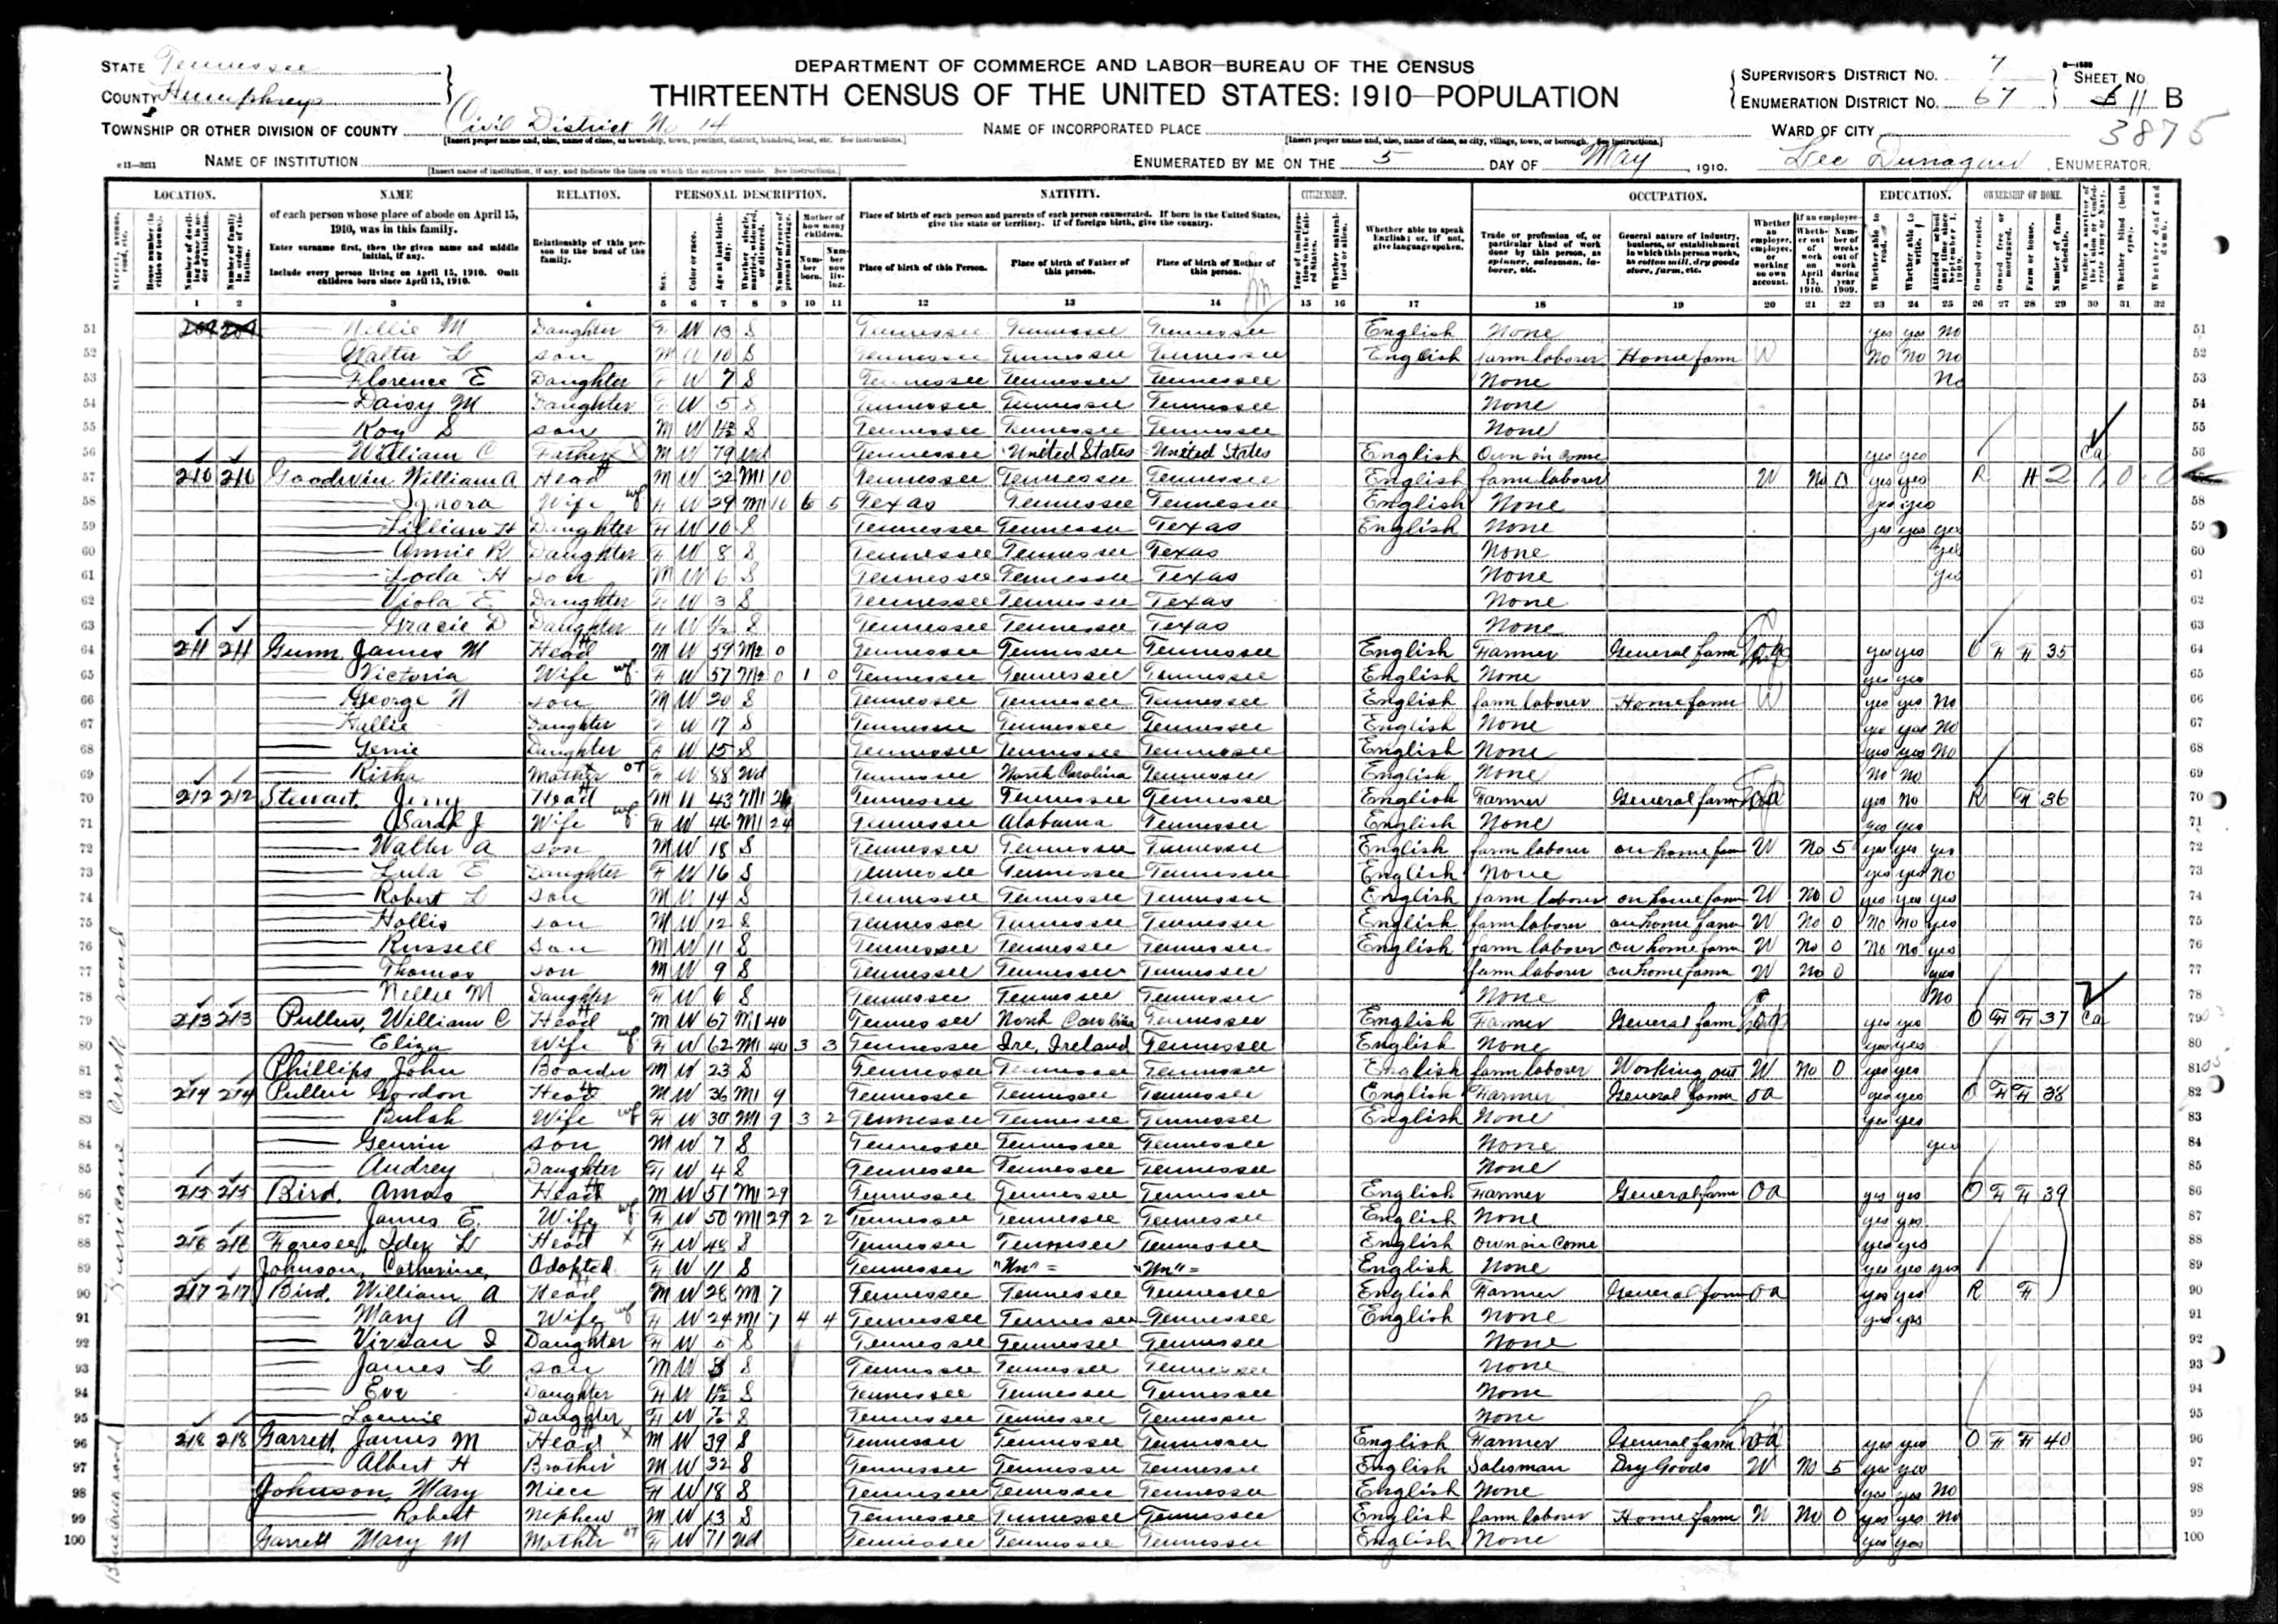 Retha (Brazzell) Gunn, 1910 census in the home of her son, James M. Gunn, Humphreys County, Tennessee